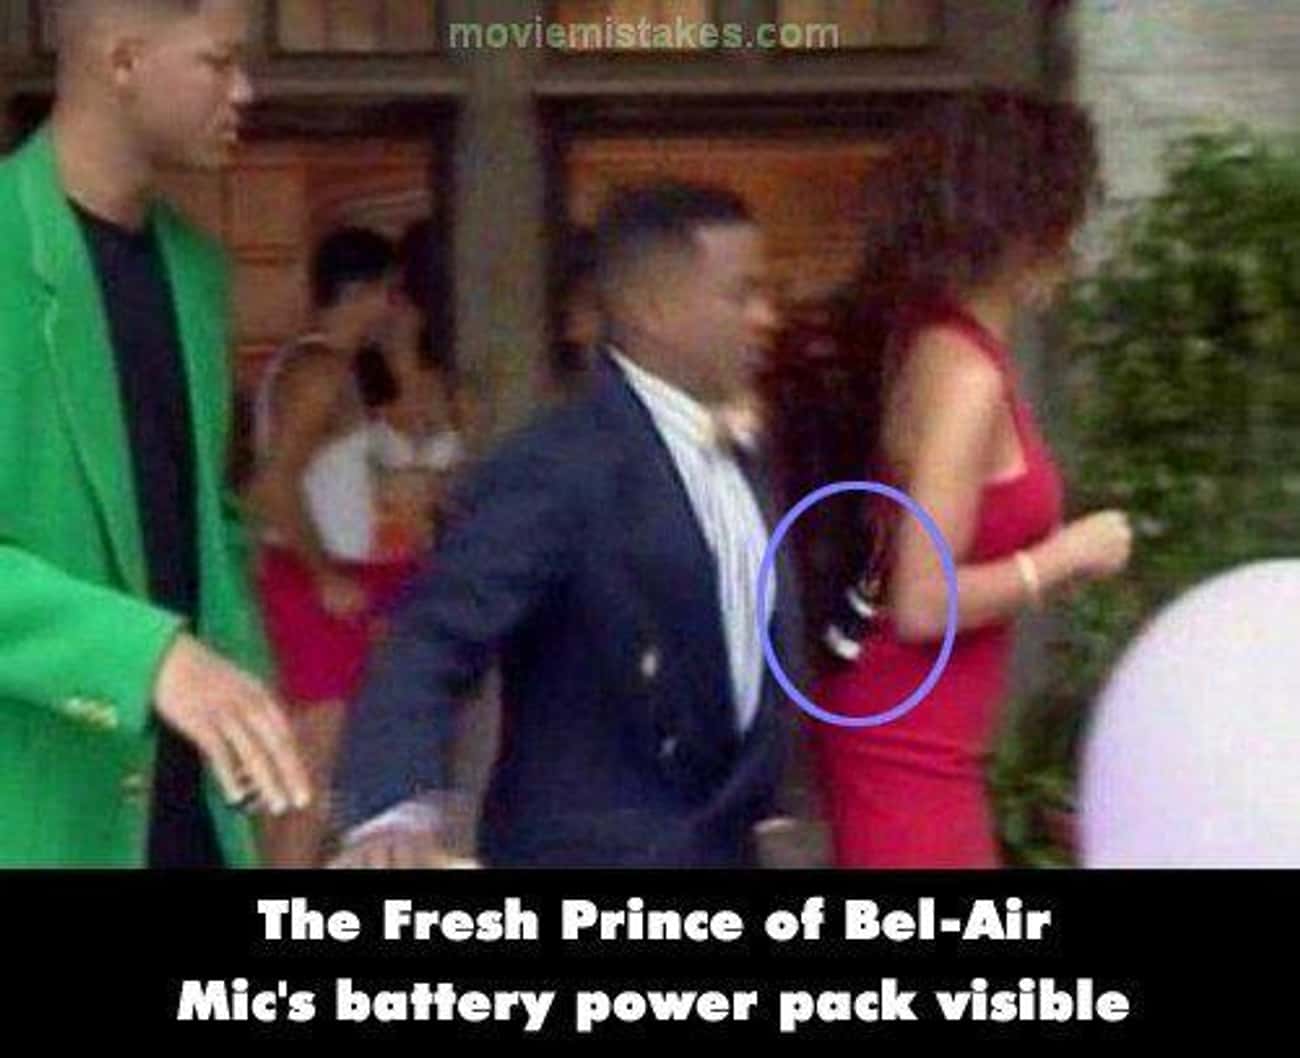 The Visible Mic Pack On 'Fresh Prince of Bel-Air'